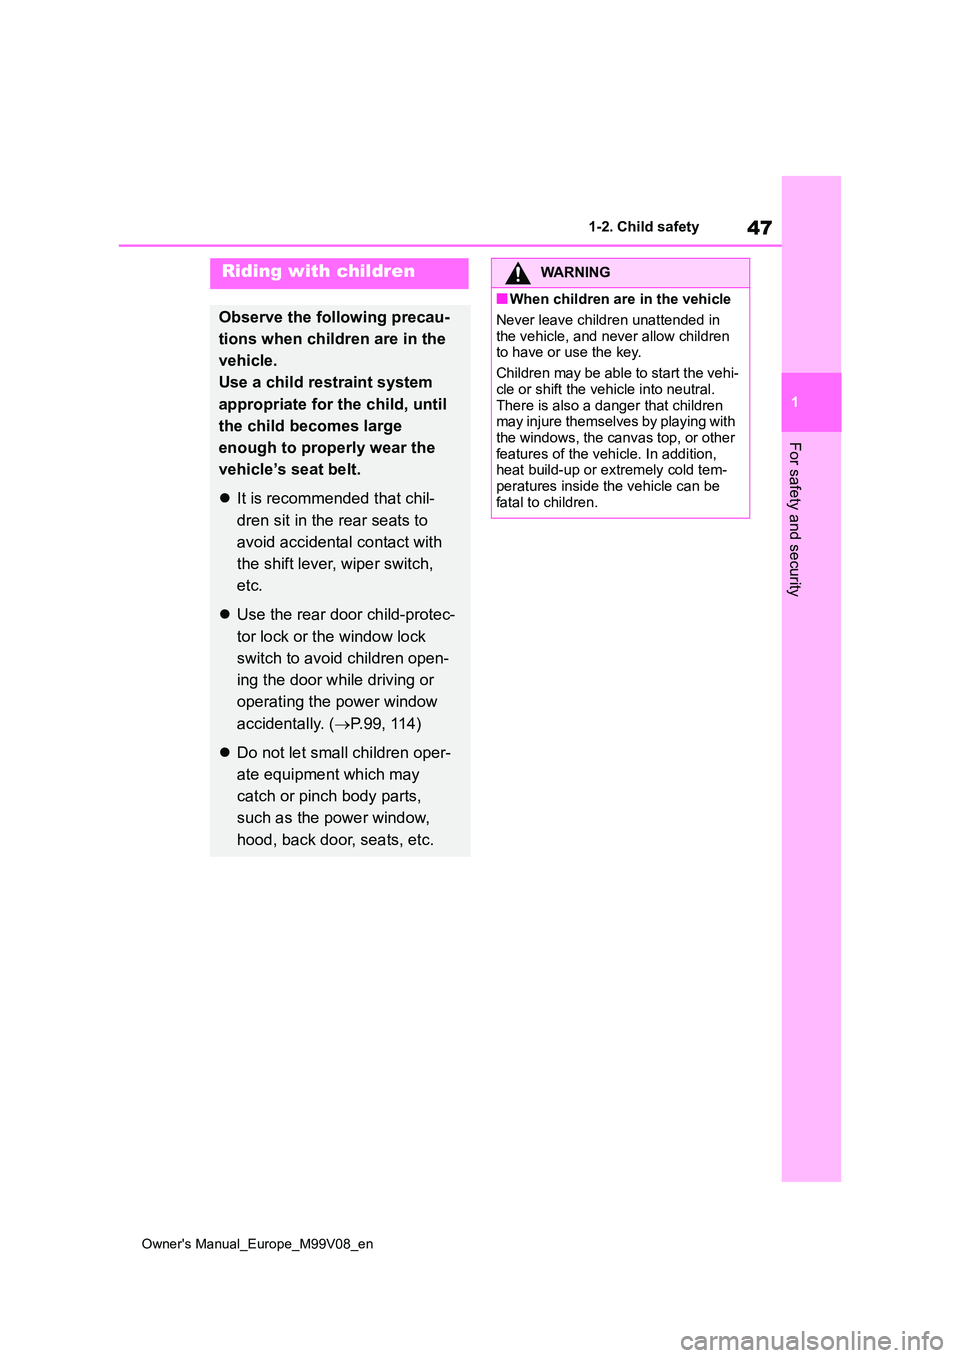 TOYOTA AYGO X 2022  Owners Manual (in English) 47
1
Owner's Manual_Europe_M99V08_en
1-2. Child safety
For safety and security
Riding with children
Observe the following precau- 
tions when children are in the  
vehicle. 
Use a child restraint 